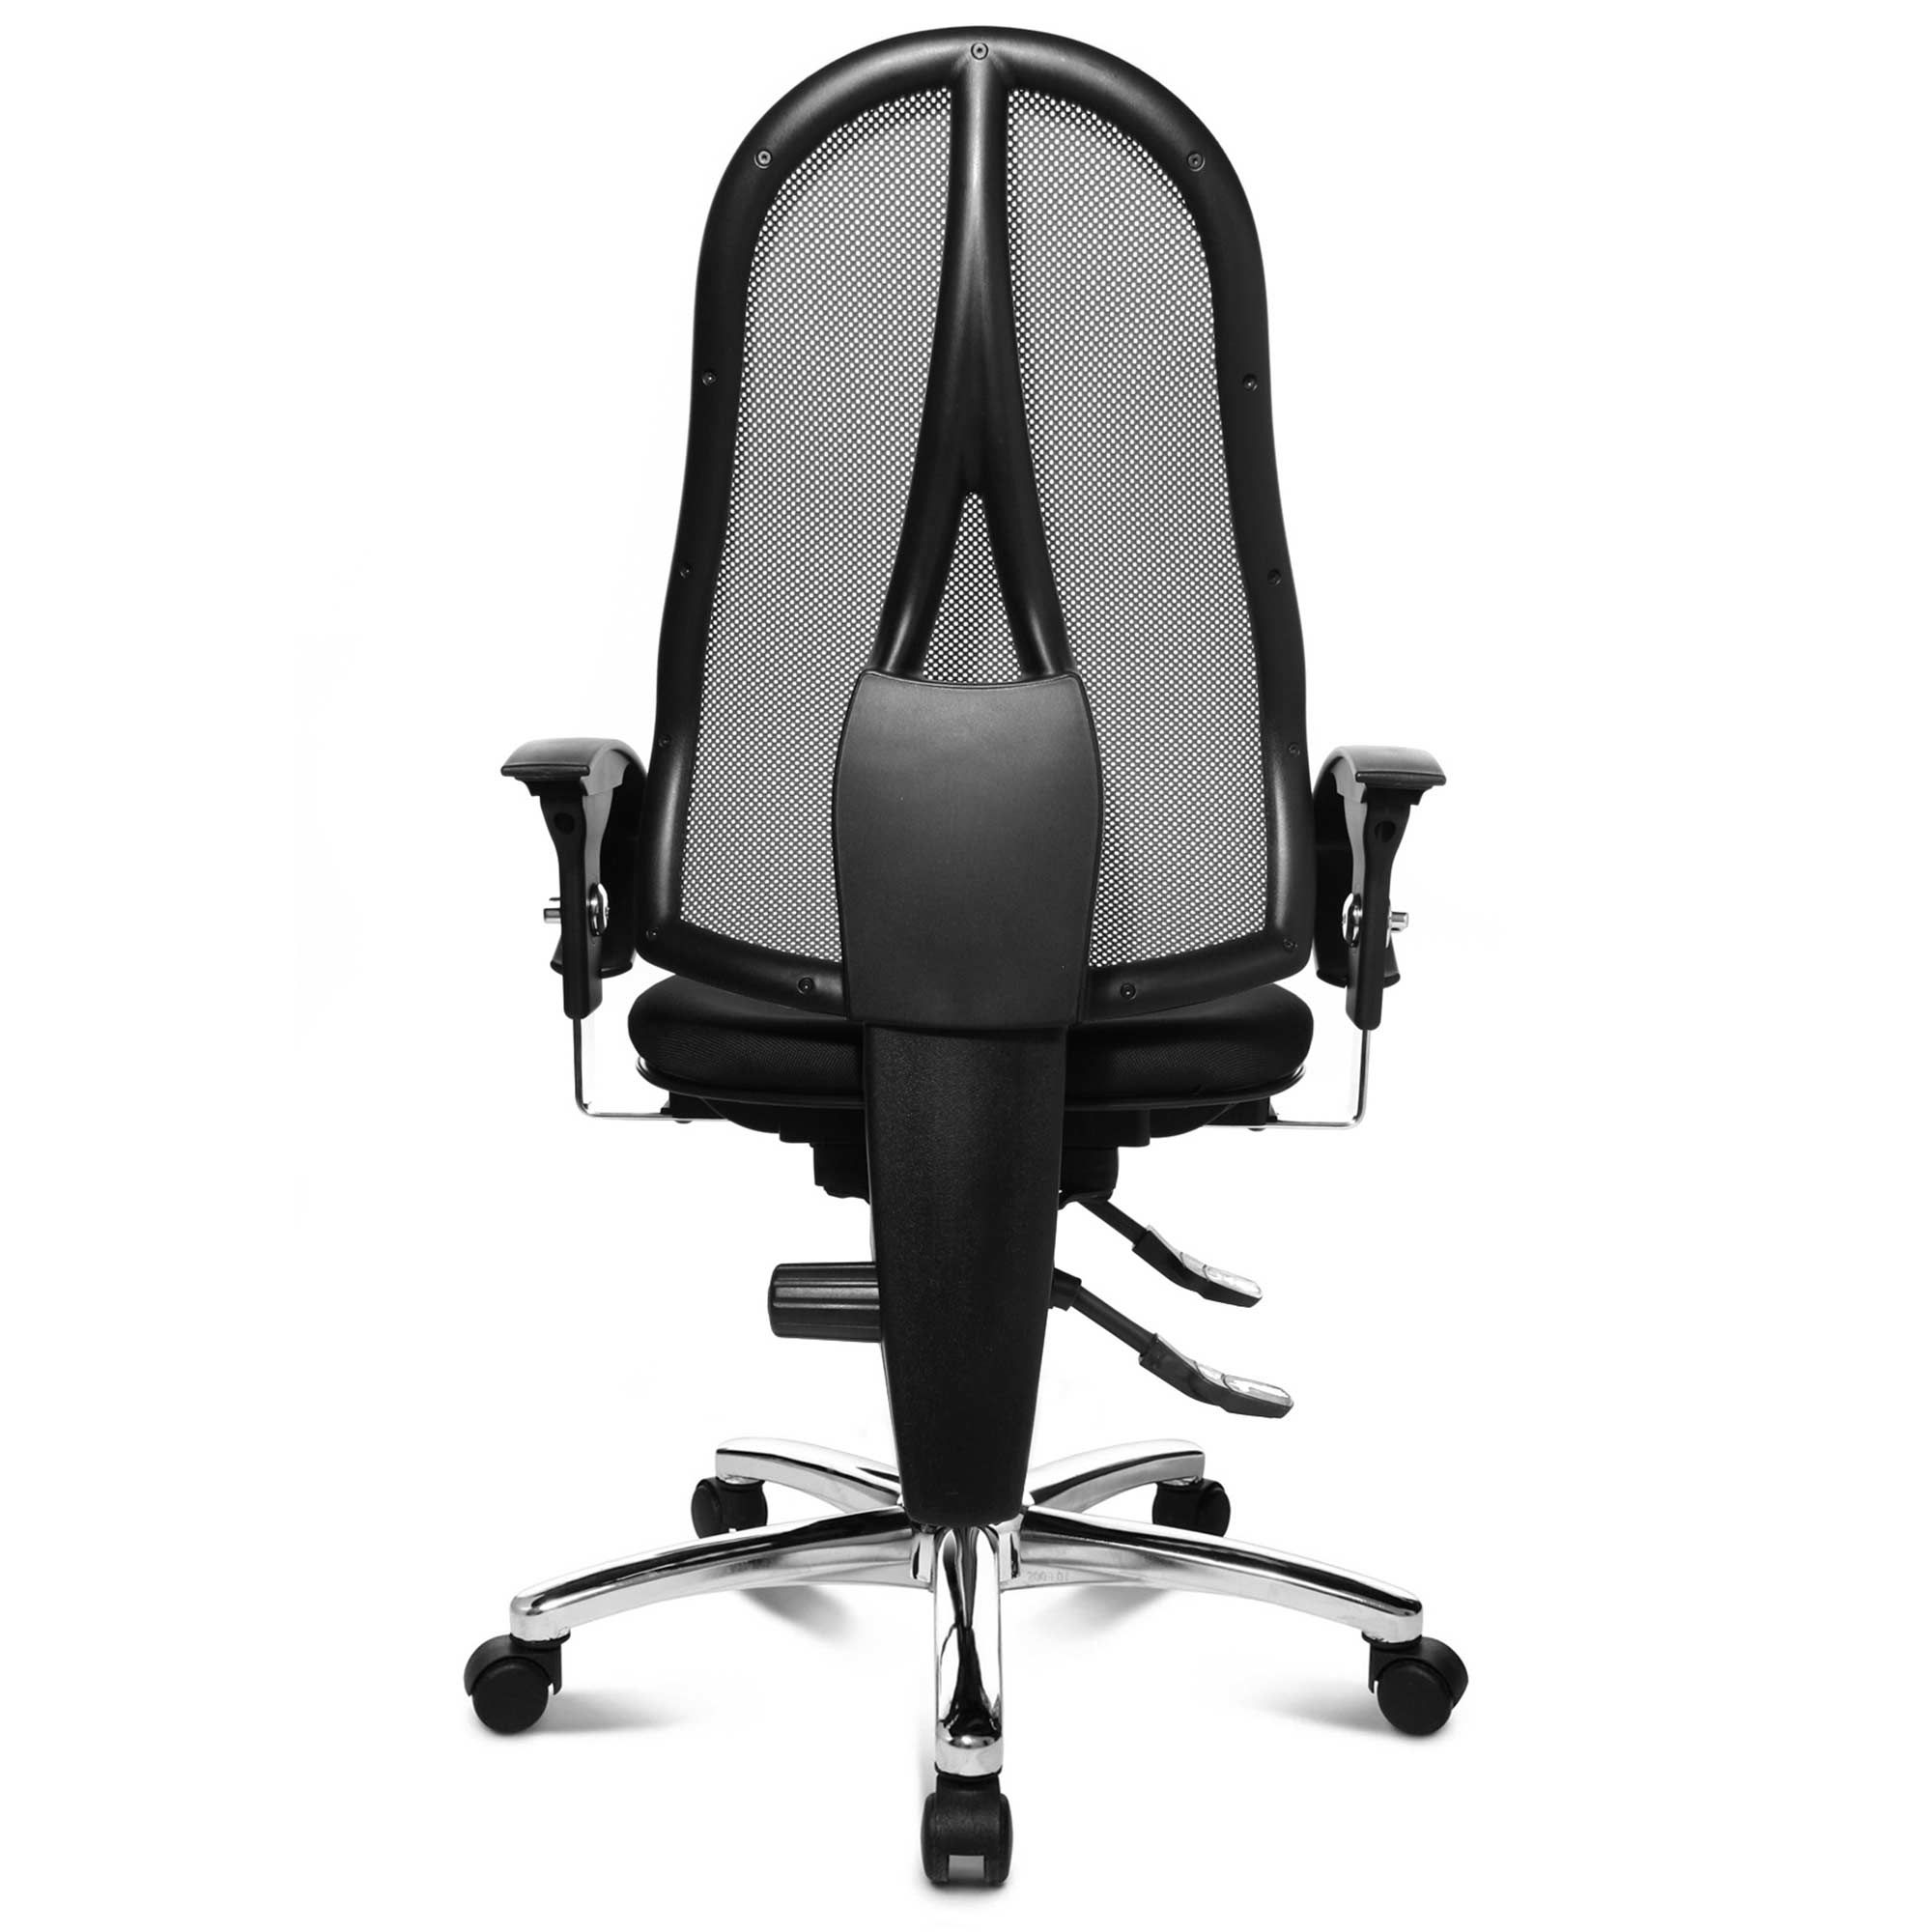 Sitness 15 Orthopaedic Office Chair Black - Office Chairs - Meubles